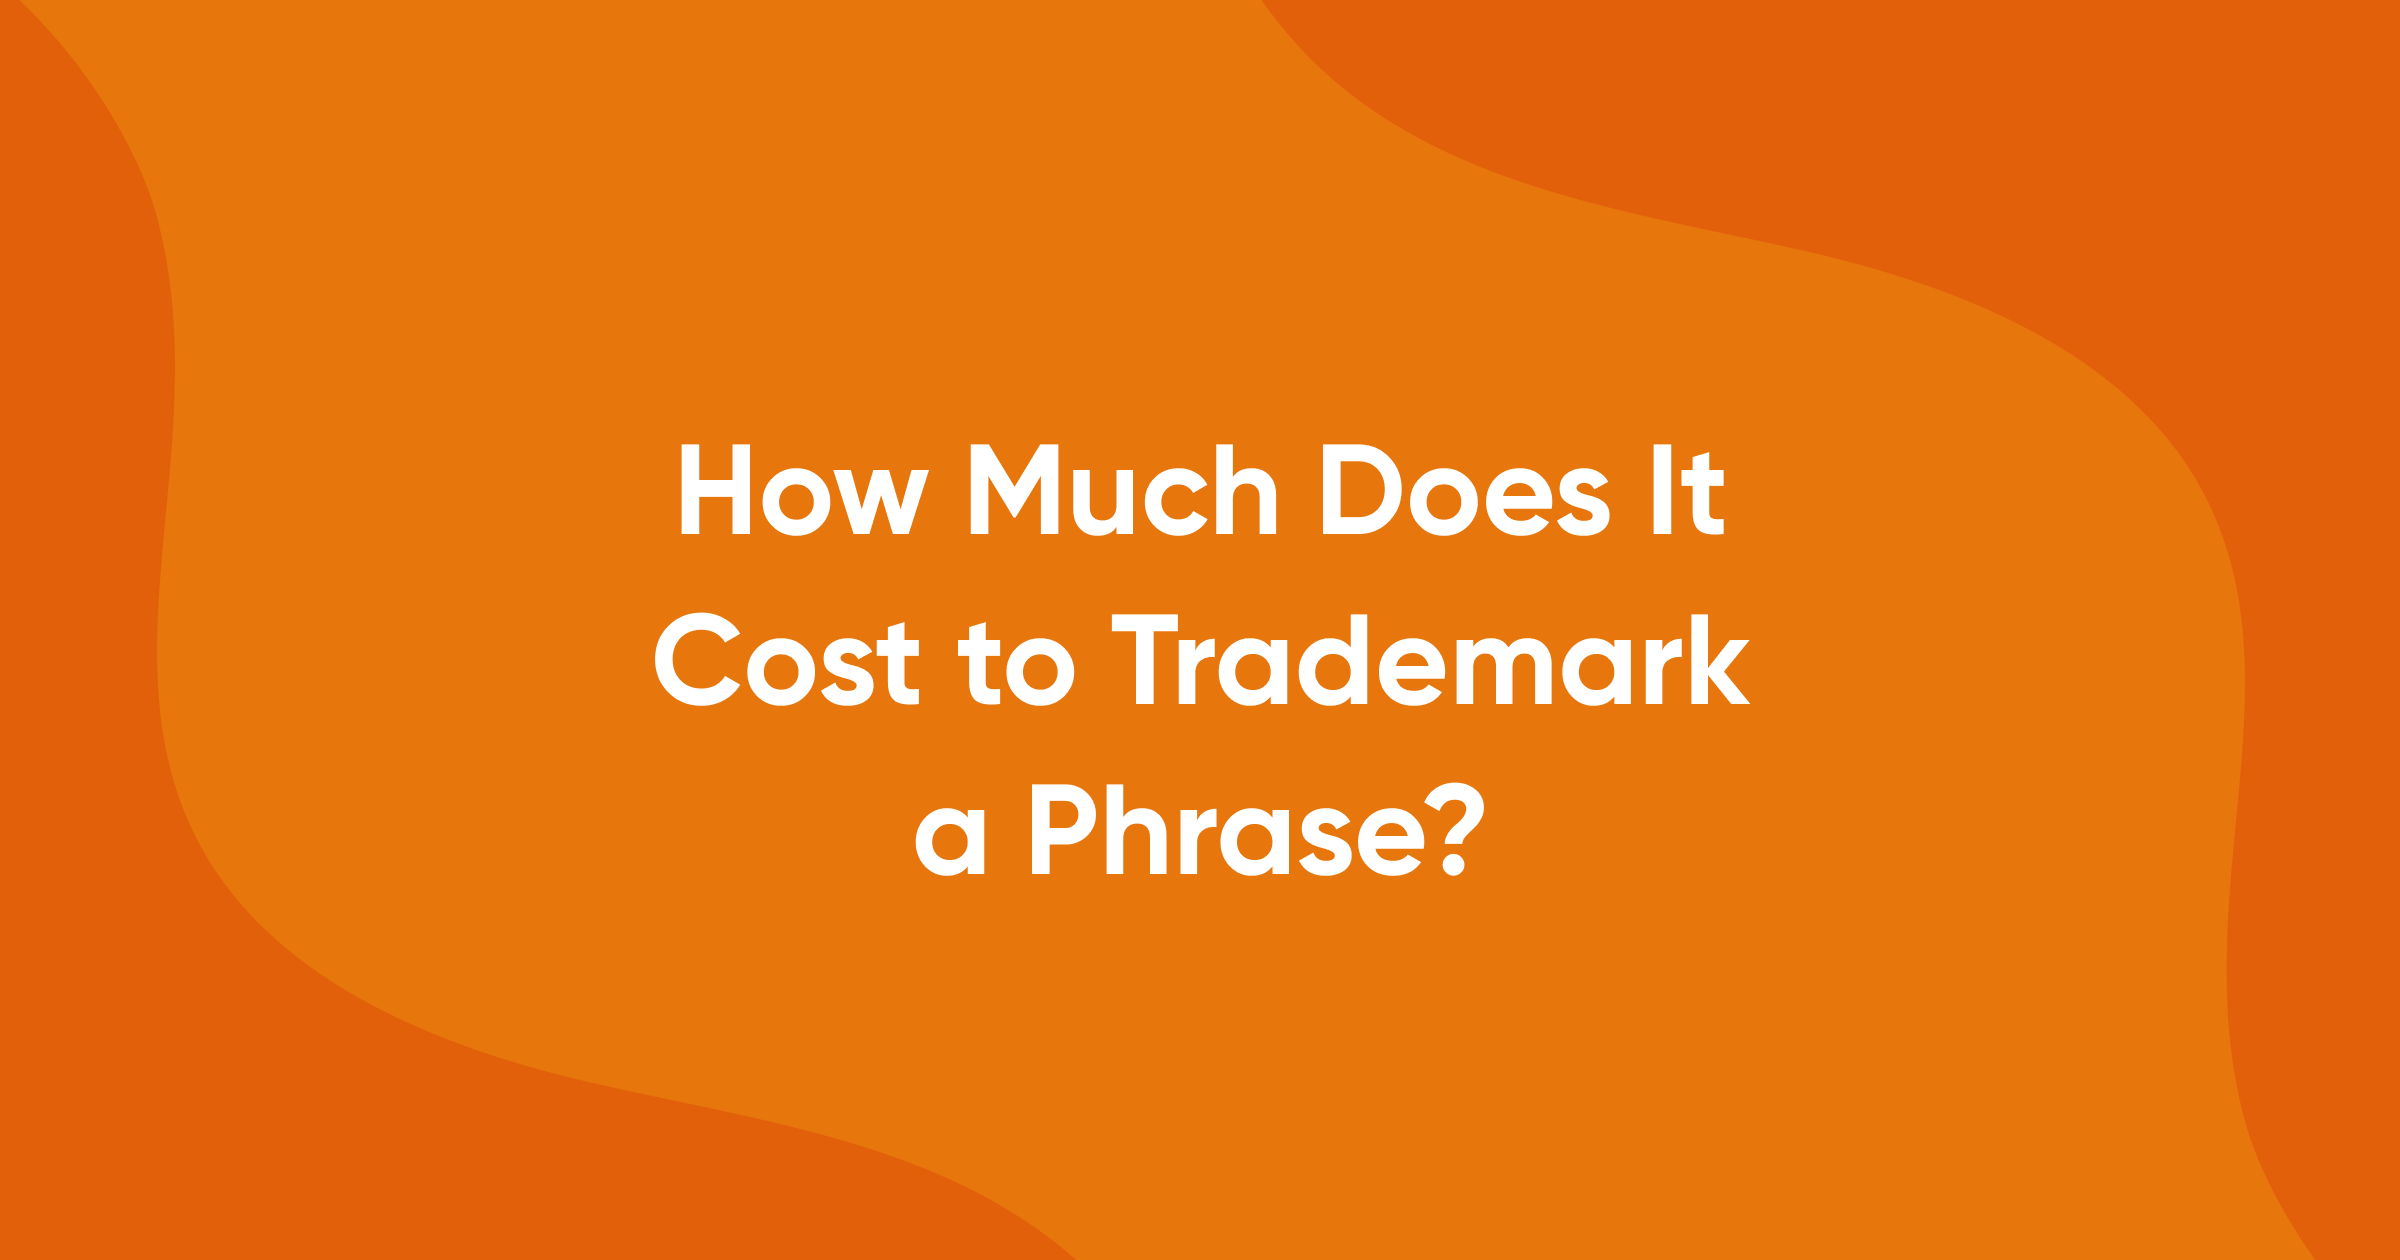 How Much Does It Cost to Trademark a Phrase?